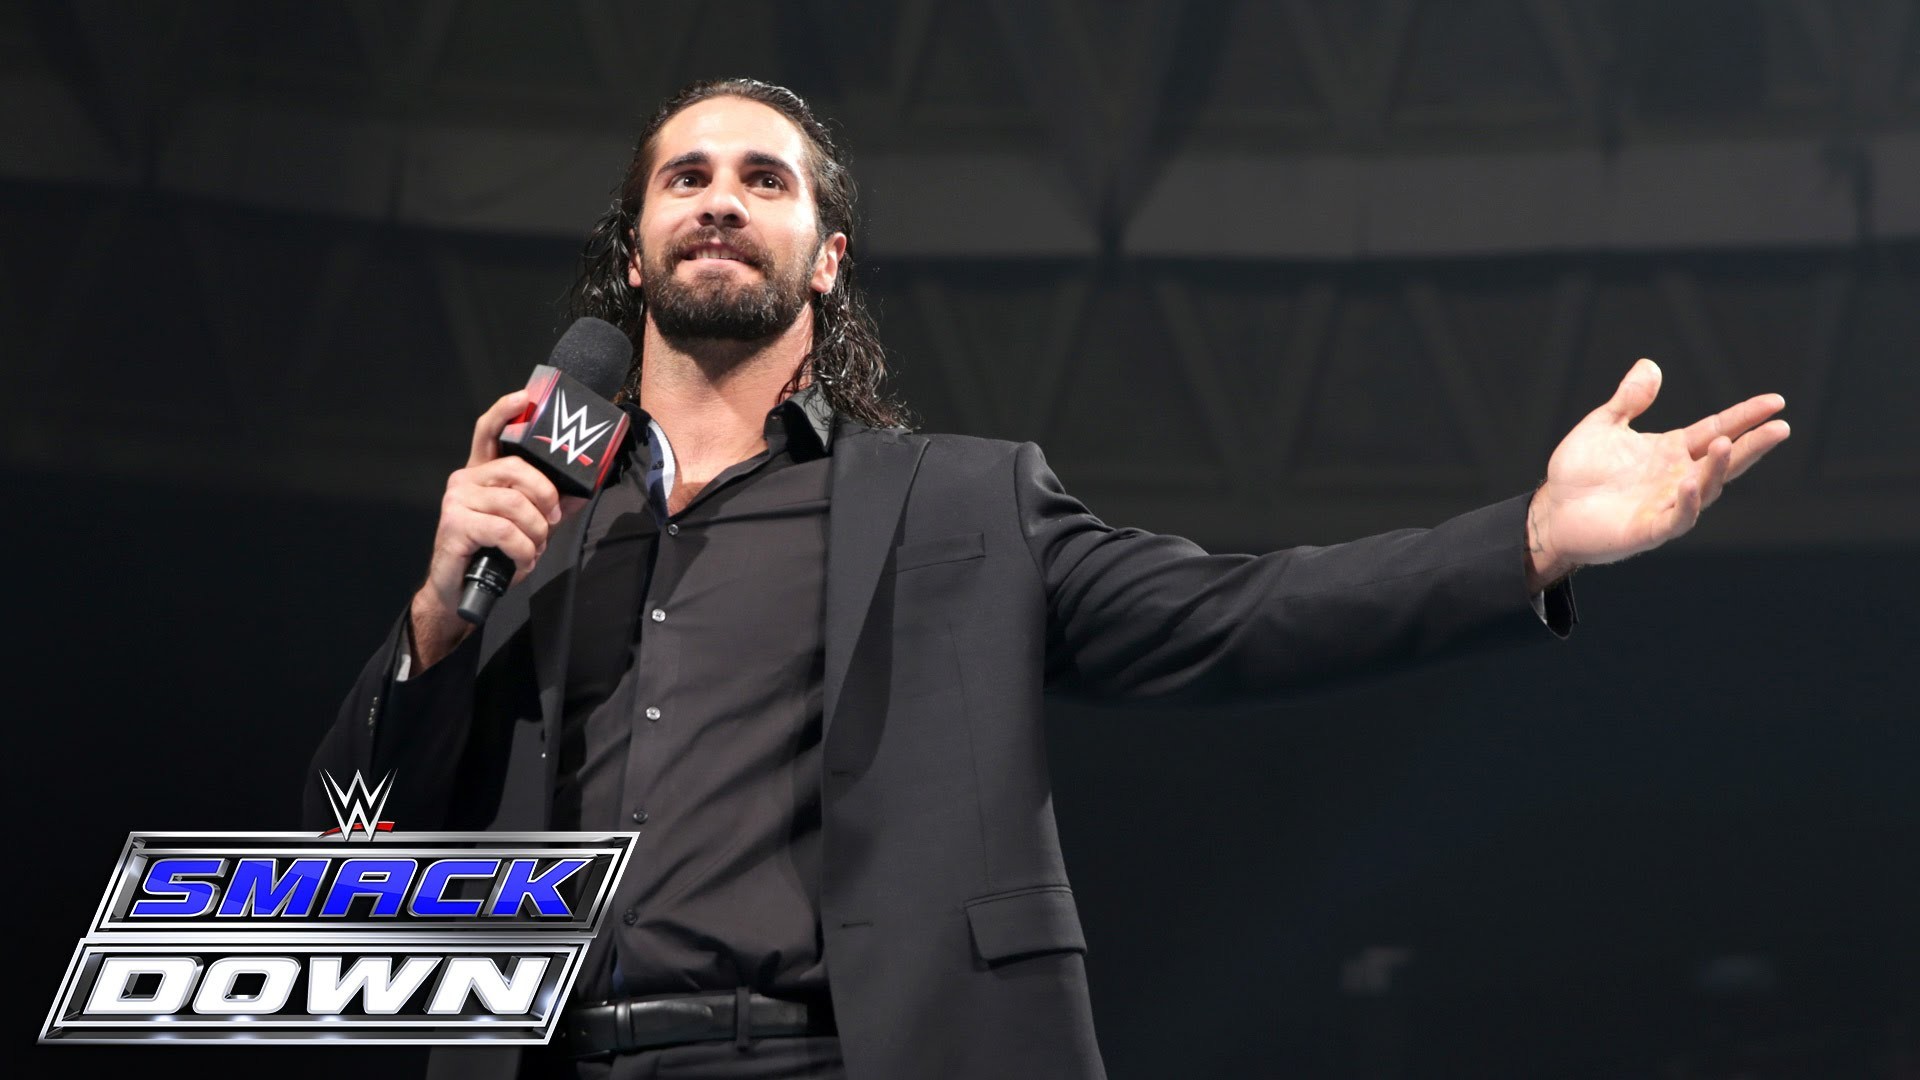 Seth Rollins returns to SmackDown and leaves with a smile on his face SmackDown, May 26, 2016